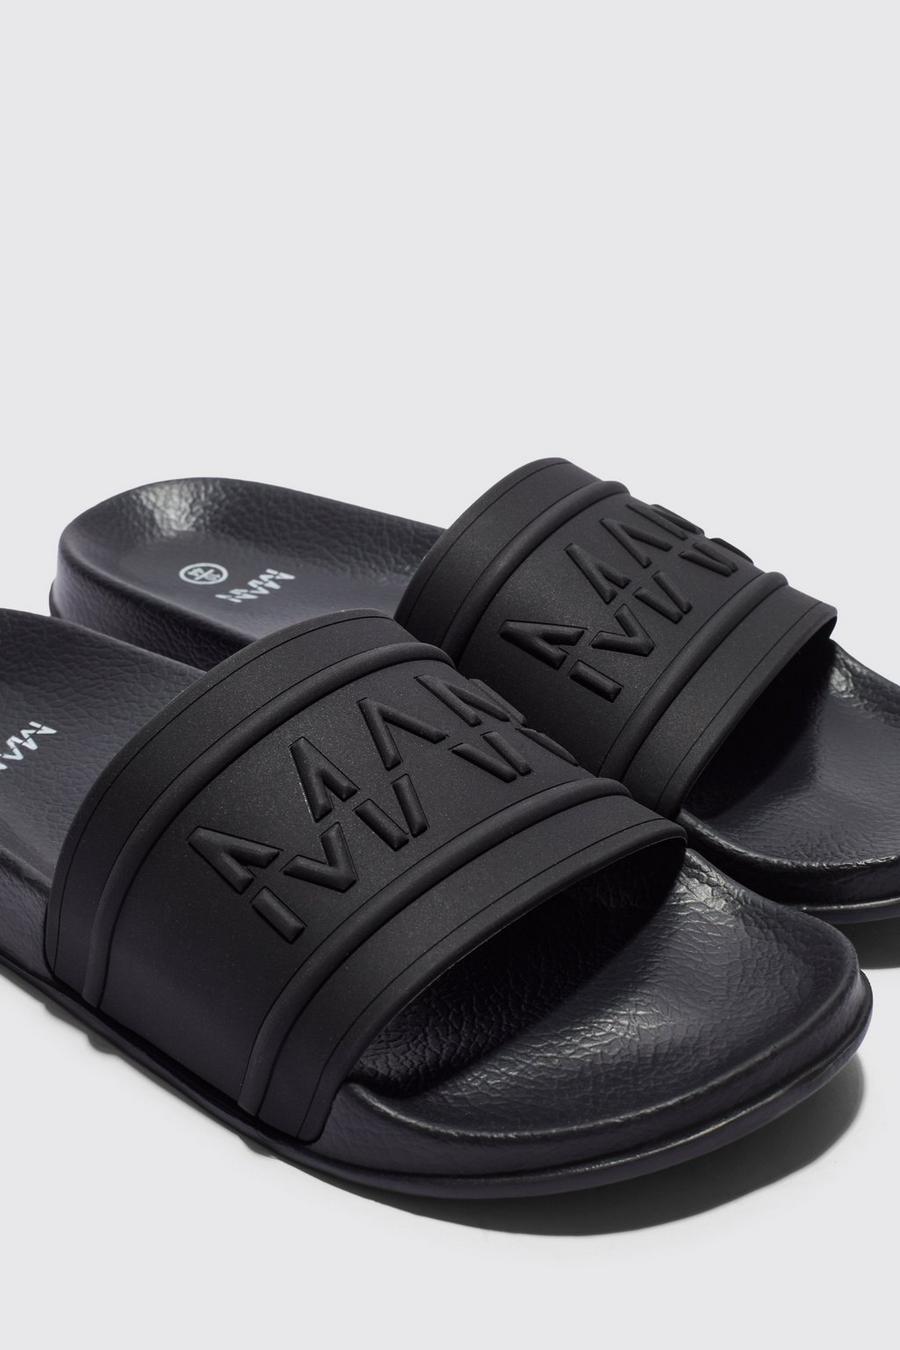 Buy online Black Printed Flip Flop from Slippers, Flip Flops & Sliders for  Men by Style Height for ₹389 at 44% off